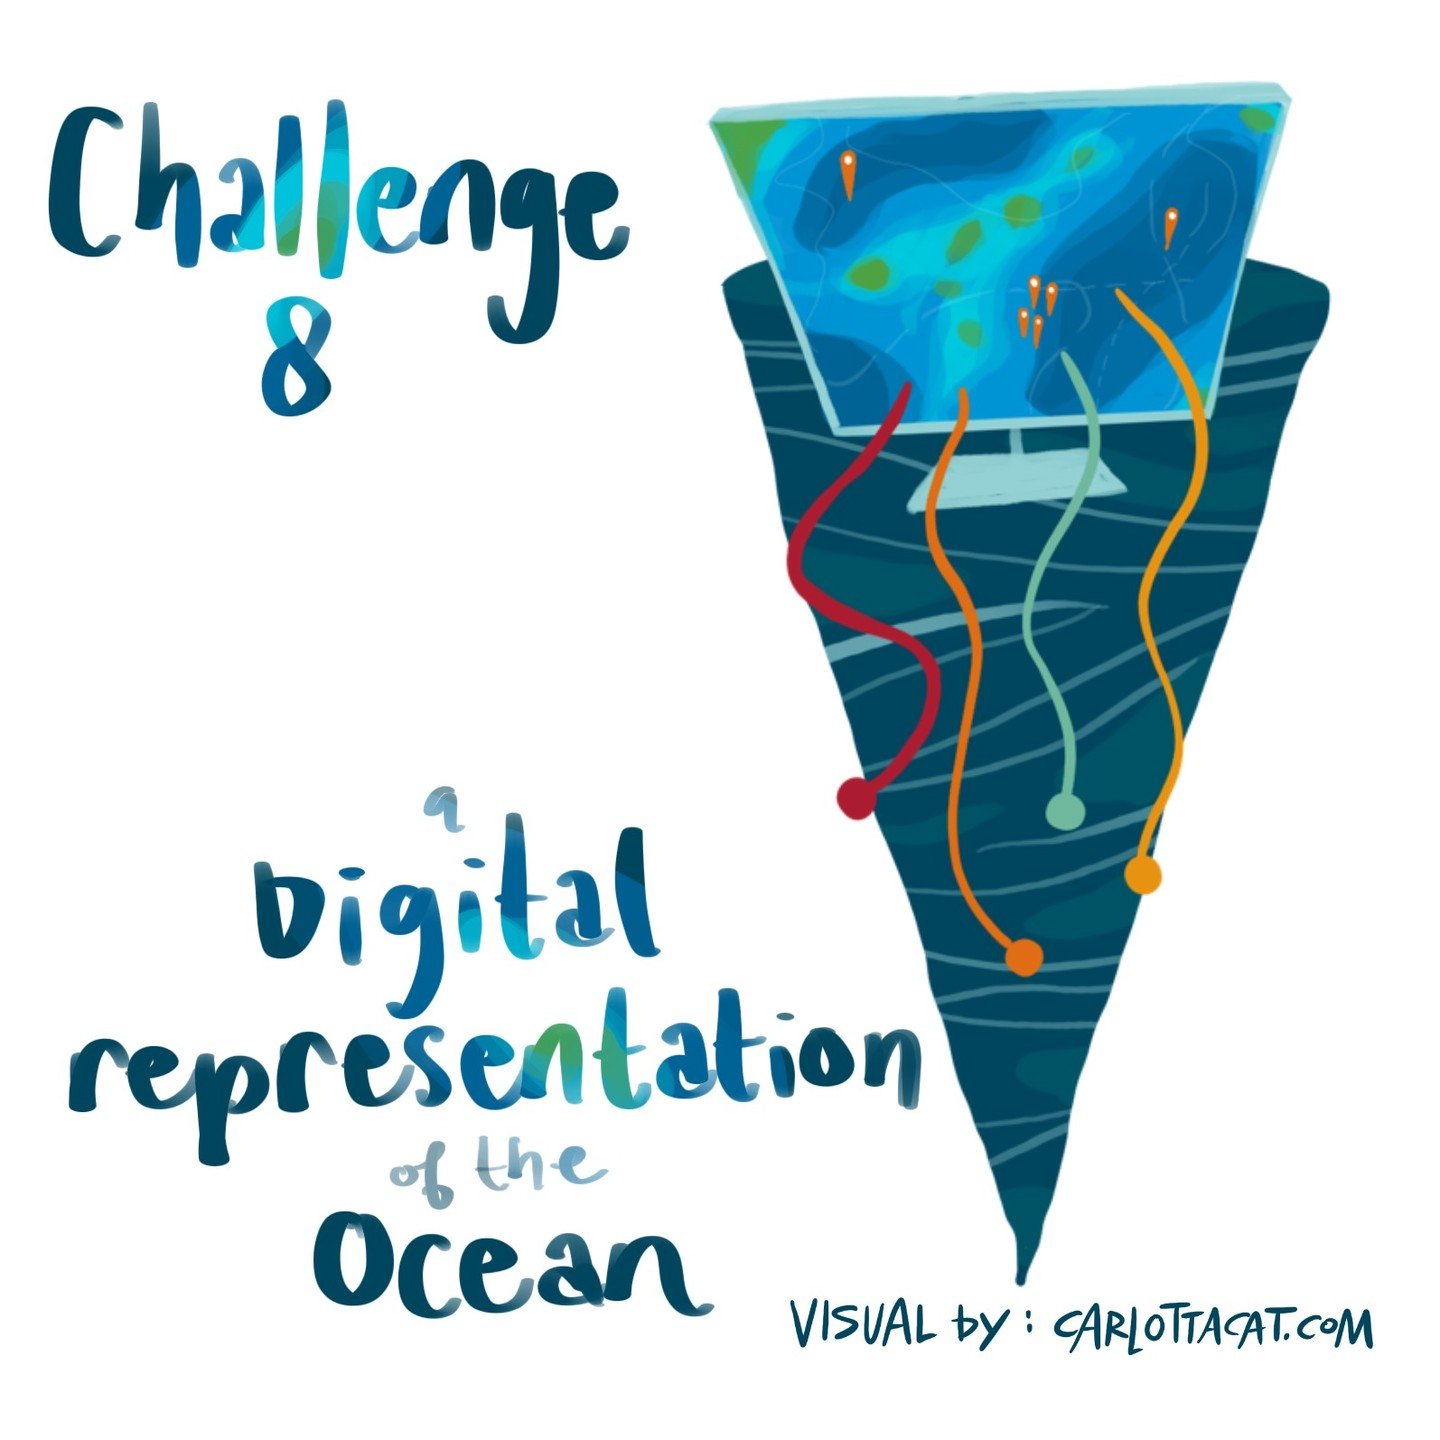 UN Ocean Decade challenge 8: Digital representation of the ocean

We know more about the moon than about the Ocean. We need to fully explore and map the Ocean, from high seas to the deep blue, to model and predict ocean dynamics better than ever.

#d